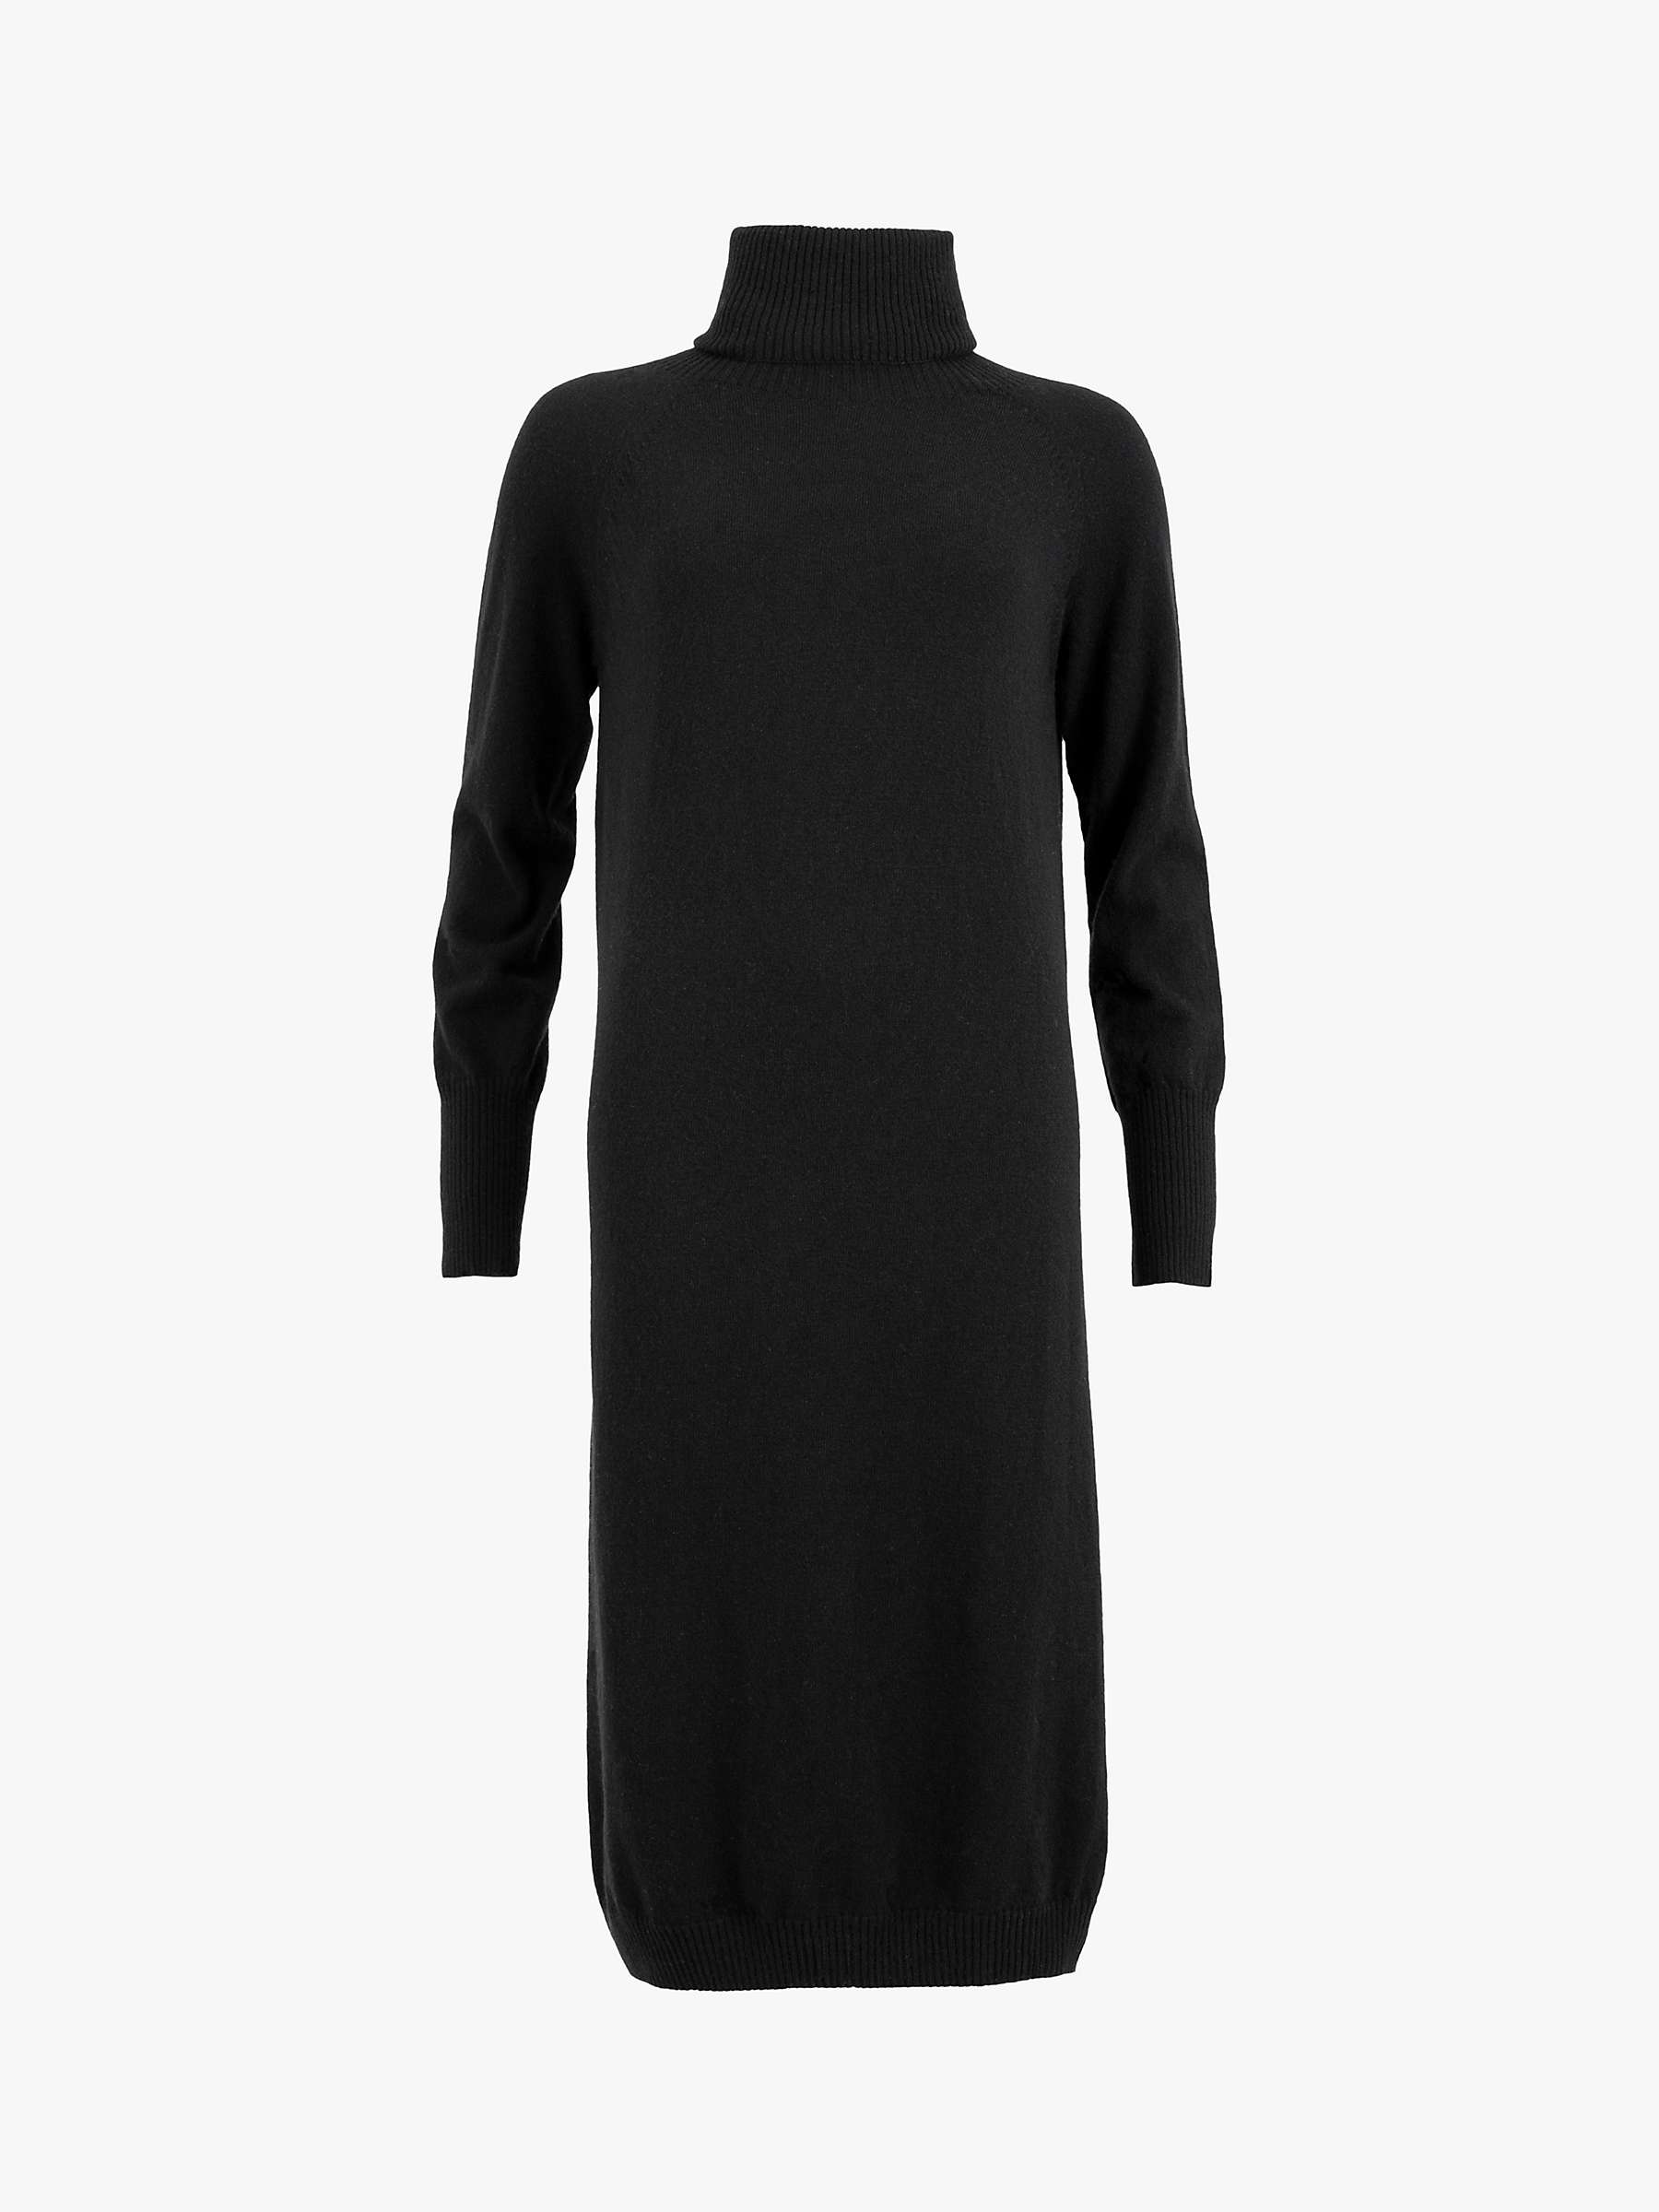 Buy Celtic & Co. Wool Slouch Roll Neck Dress Online at johnlewis.com